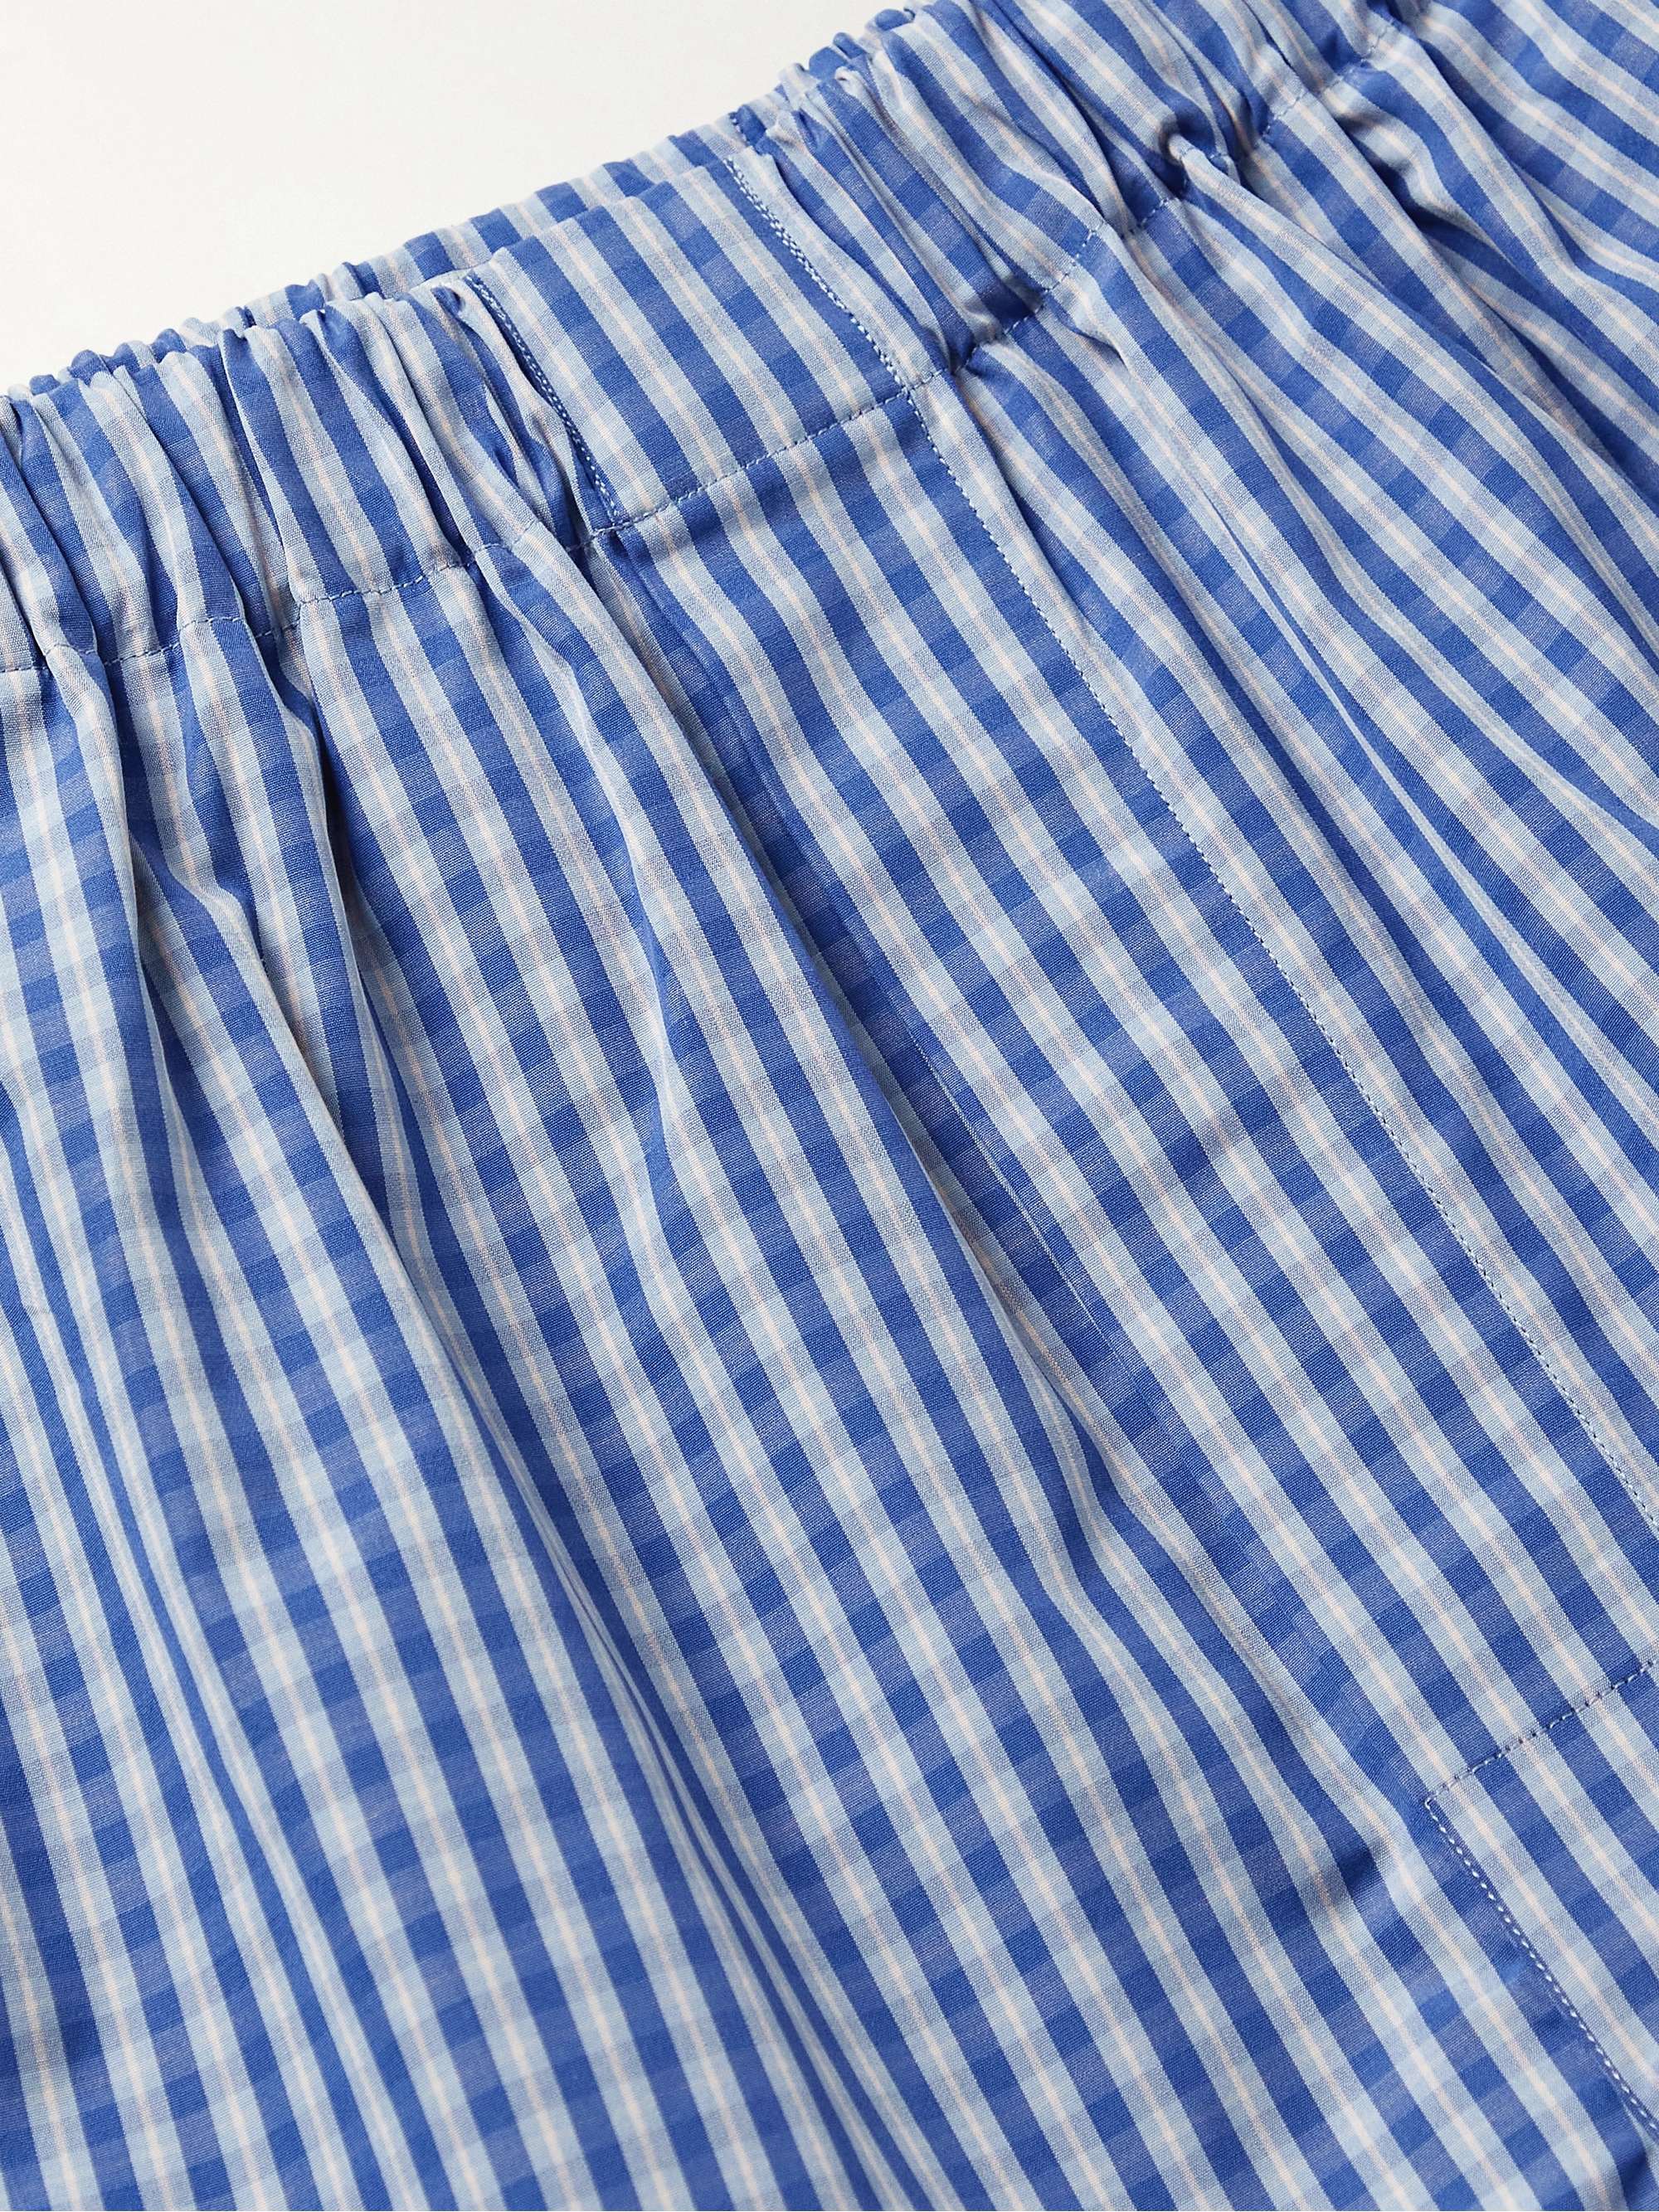 TURNBULL & ASSER Checked Cotton Boxer Shorts